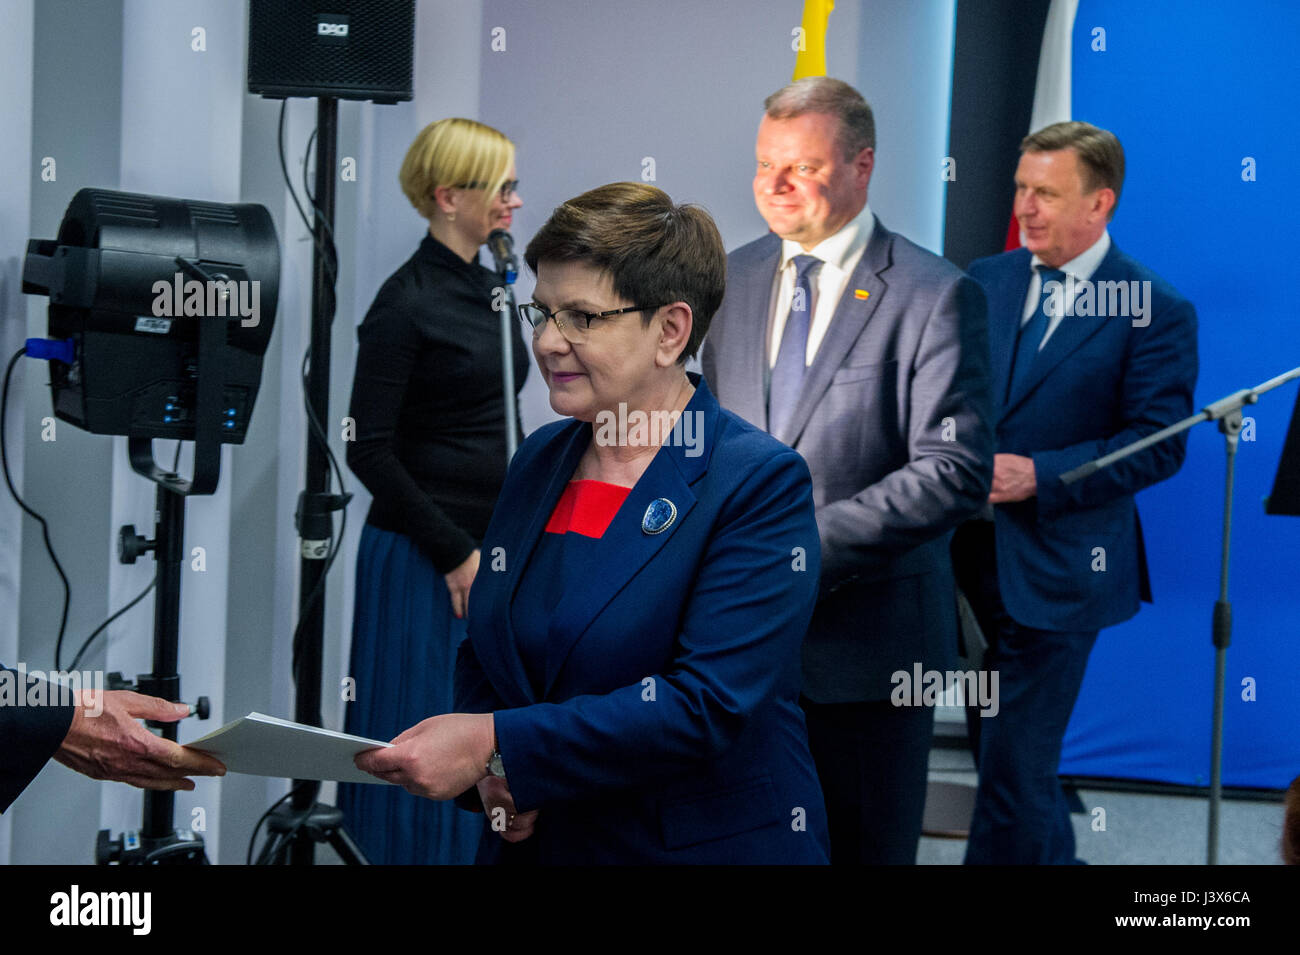 Tallinn, Estonia, 8th May 2017. Prime Minister of Estonia Juri Ratas (not pictured), Prime Minister of Latvia Maris Kucinskis (R), Prime Minister of Lithuania Saulius Skvernelis (2nd R) and Prime Minister of Poland Beata Szydlo(2nd L) leave a press conference after their meeting in Tallinn. The topics of the meeting were regional security, energy community, transport connections and the future of the European Union. Credit: Nicolas Bouvy/Alamy Live News Stock Photo